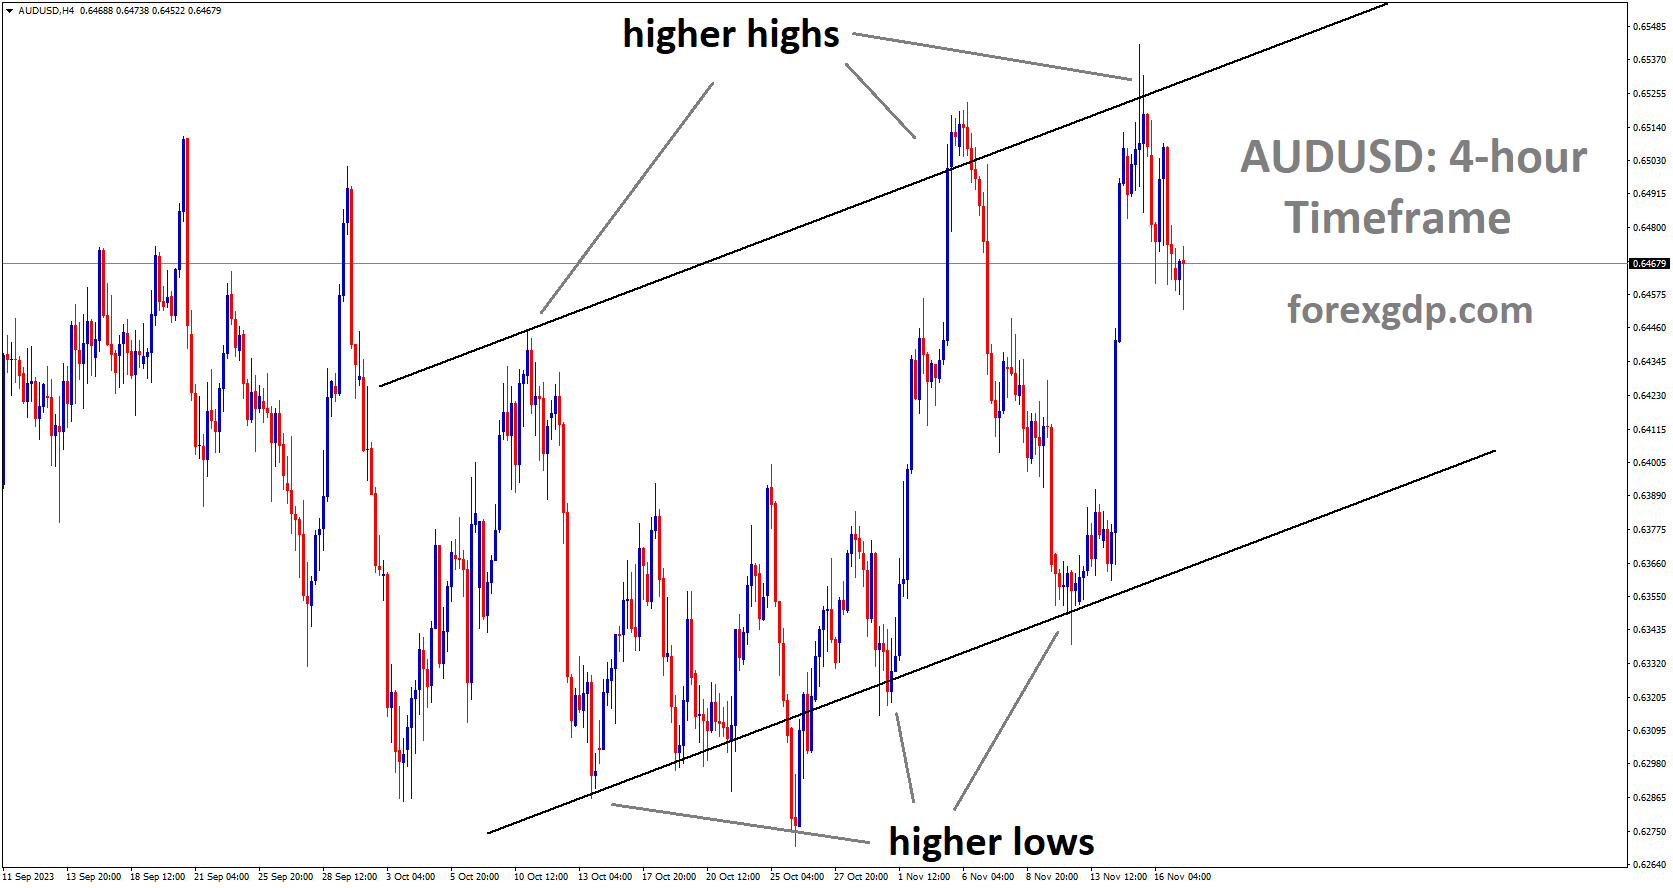 AUDUSD is moving in ascending channel and the market has fallen from the higher high area.